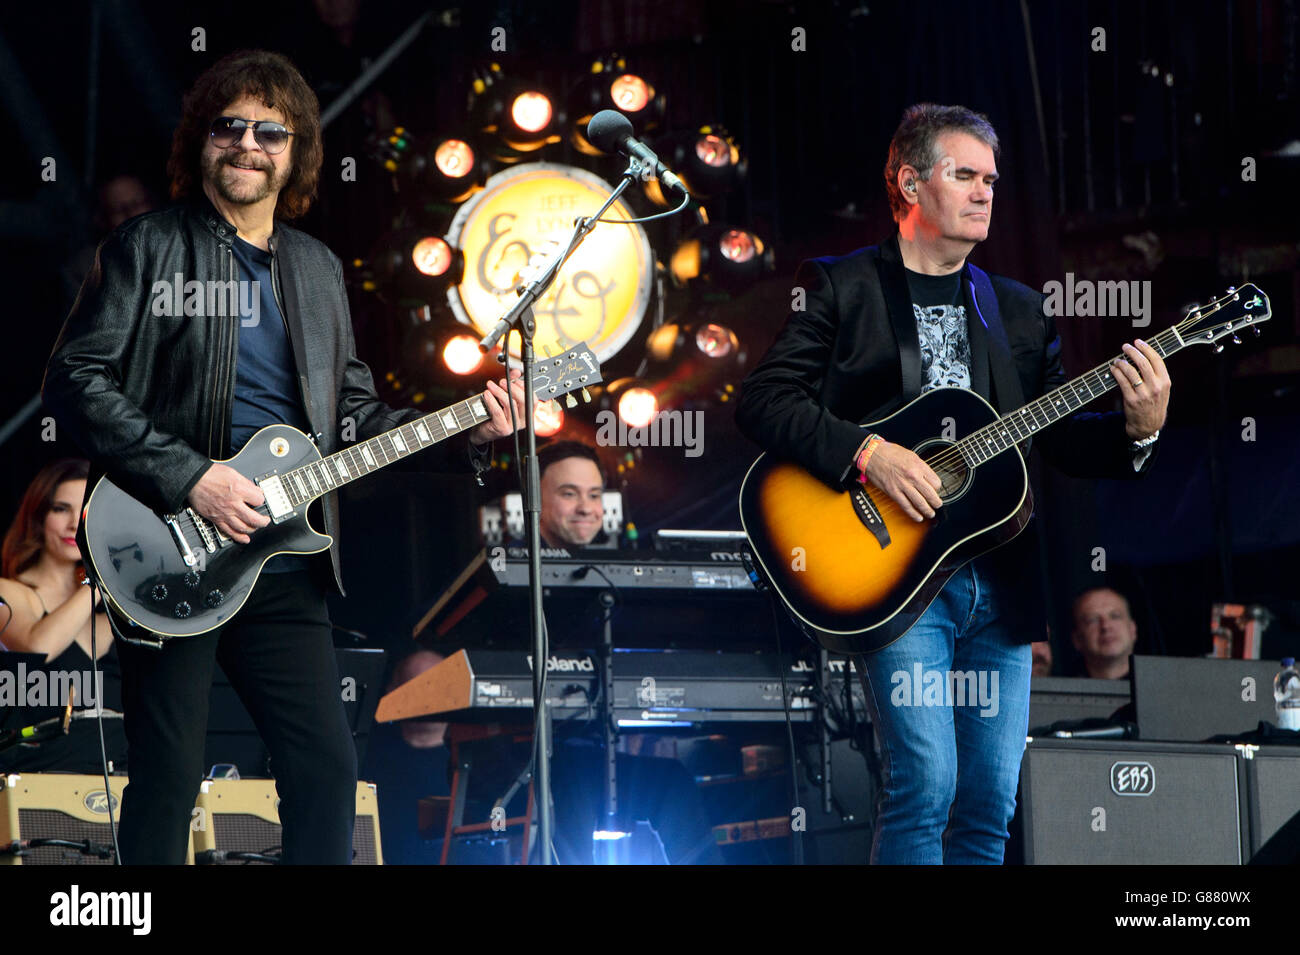 Jeff Lynne from band Electric Light Orchestra performs at the Glastonbury music festival Stock Photo